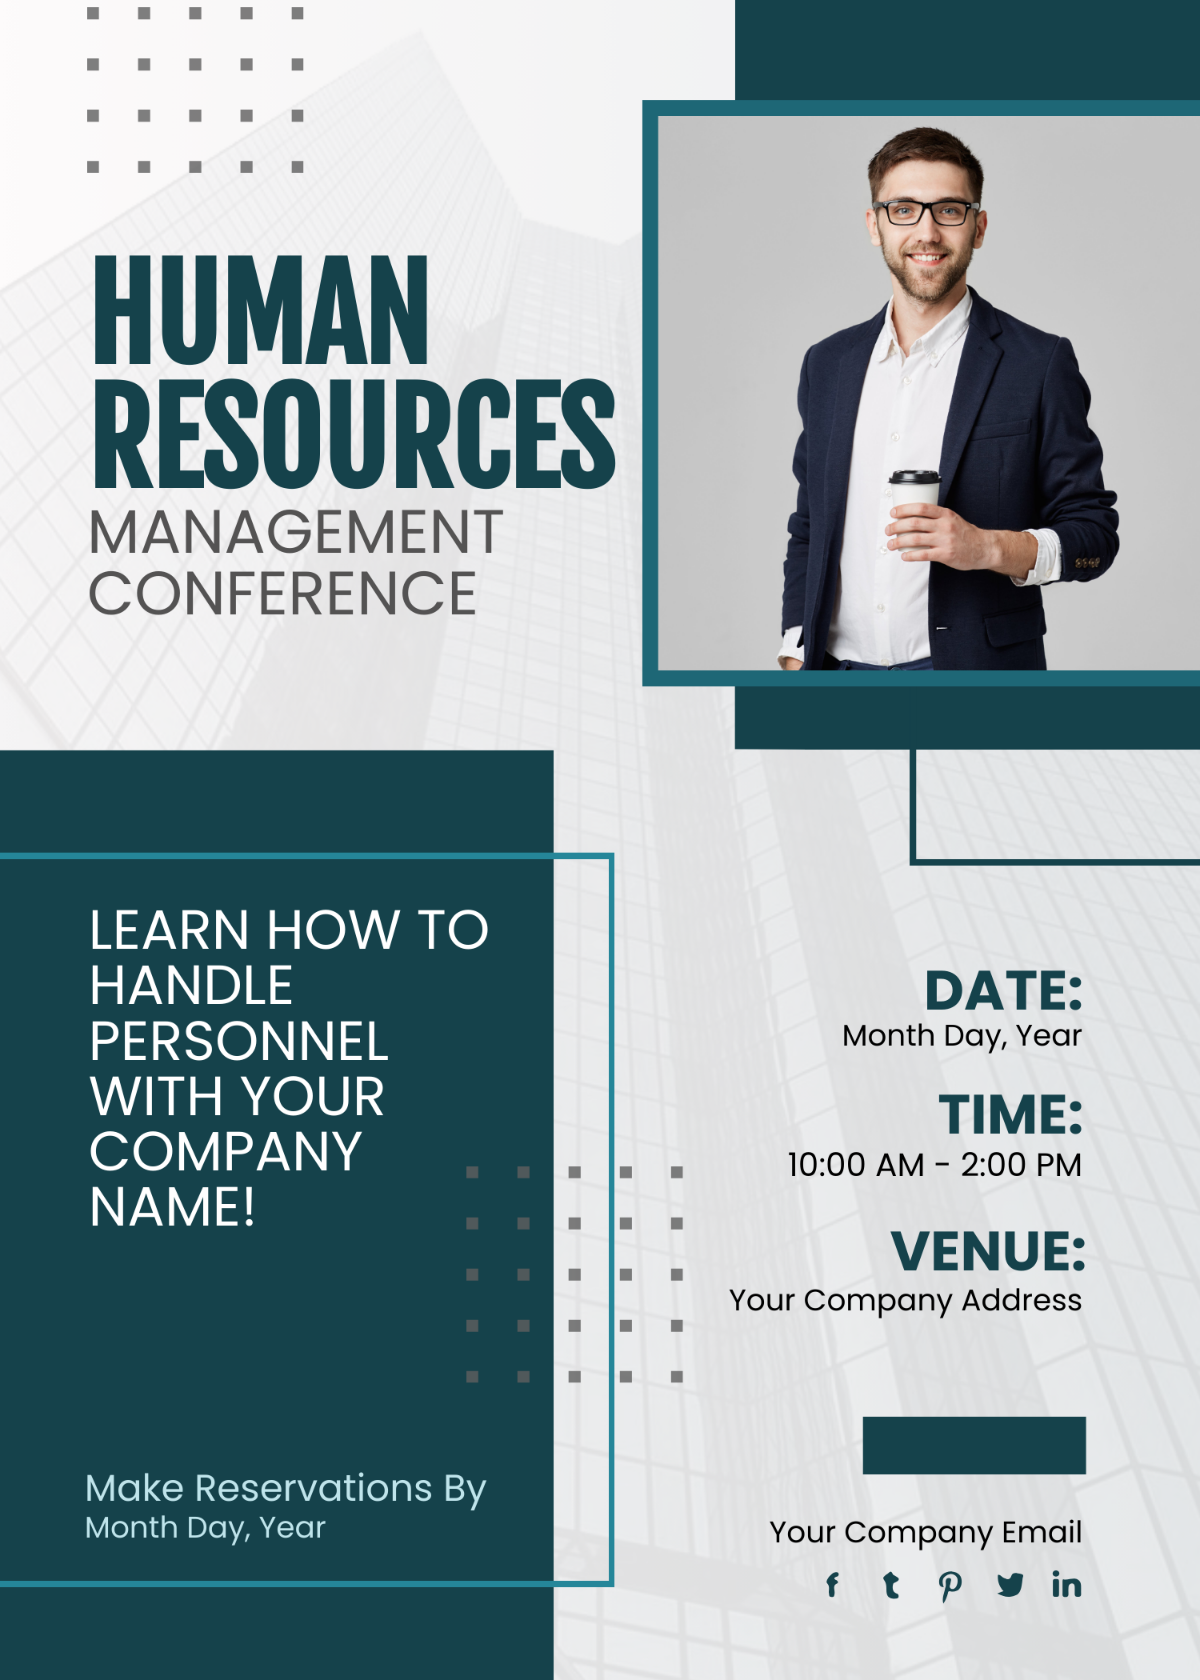 Human Resources Management Conference Invitation Card